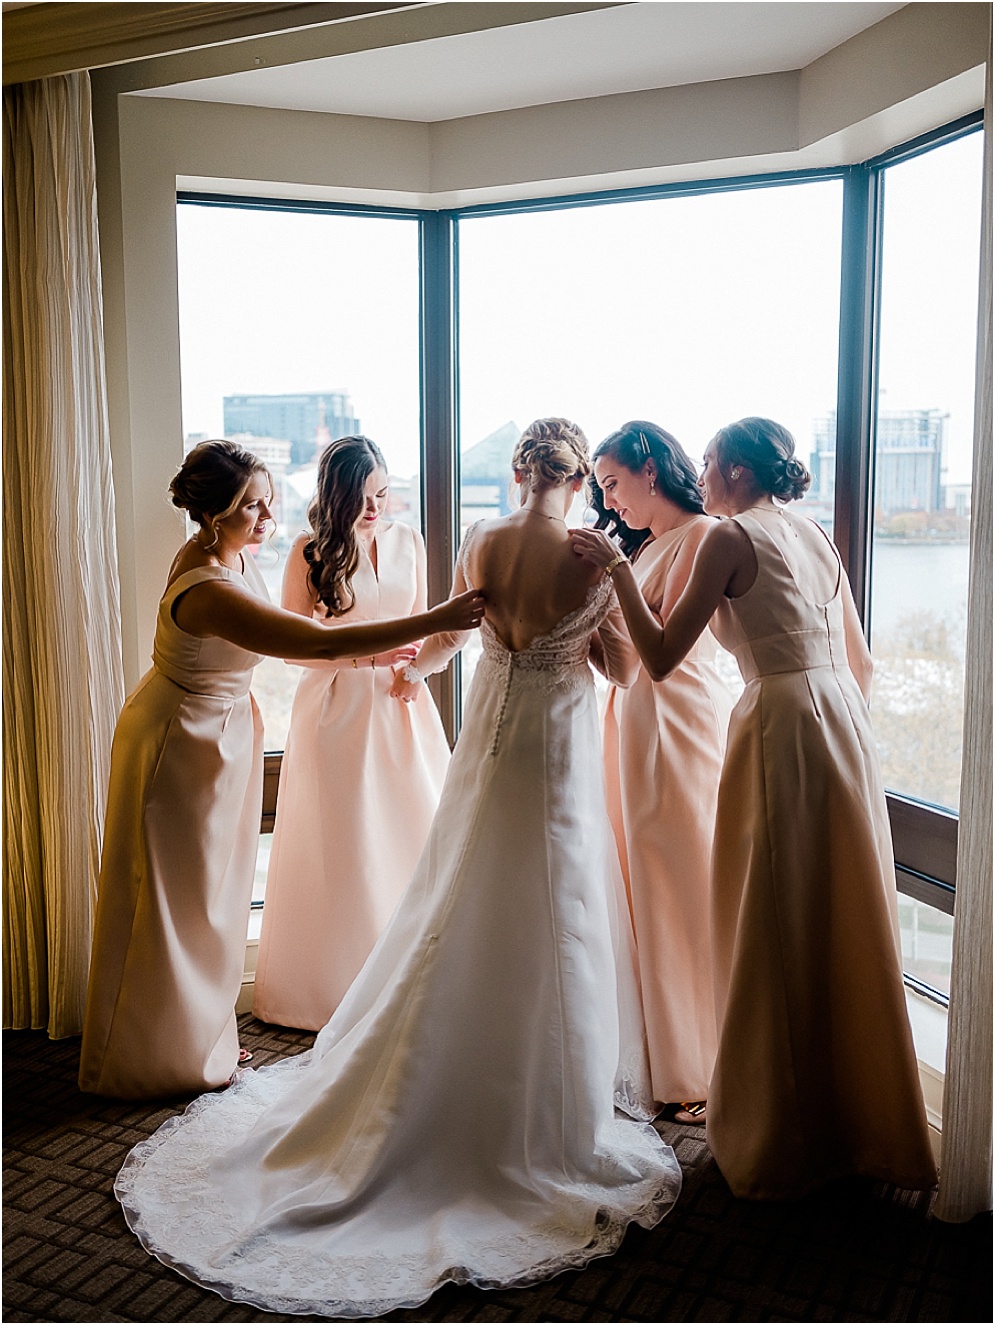 A chic, industrial wedding at the Winslow Room in Baltimore, Maryland.